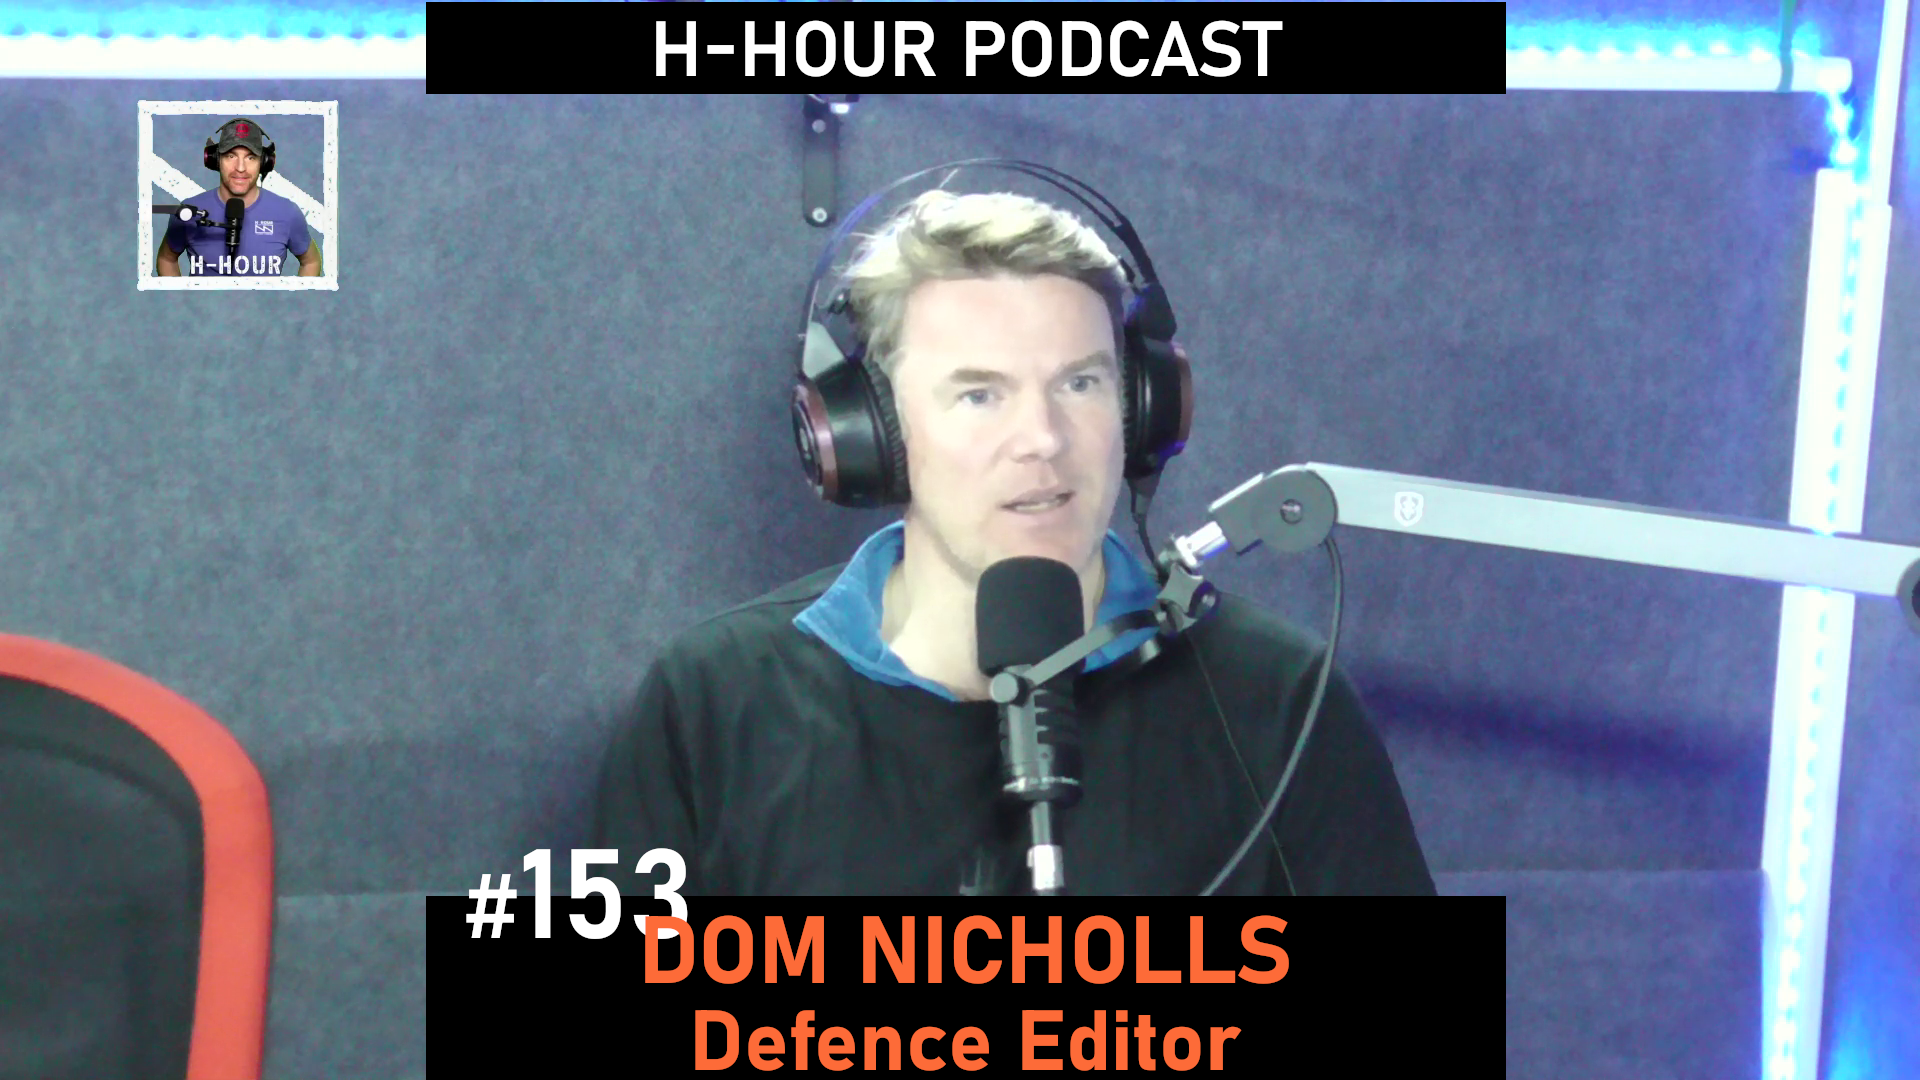 dom nicholls of the telegraph on the h-hour podcast